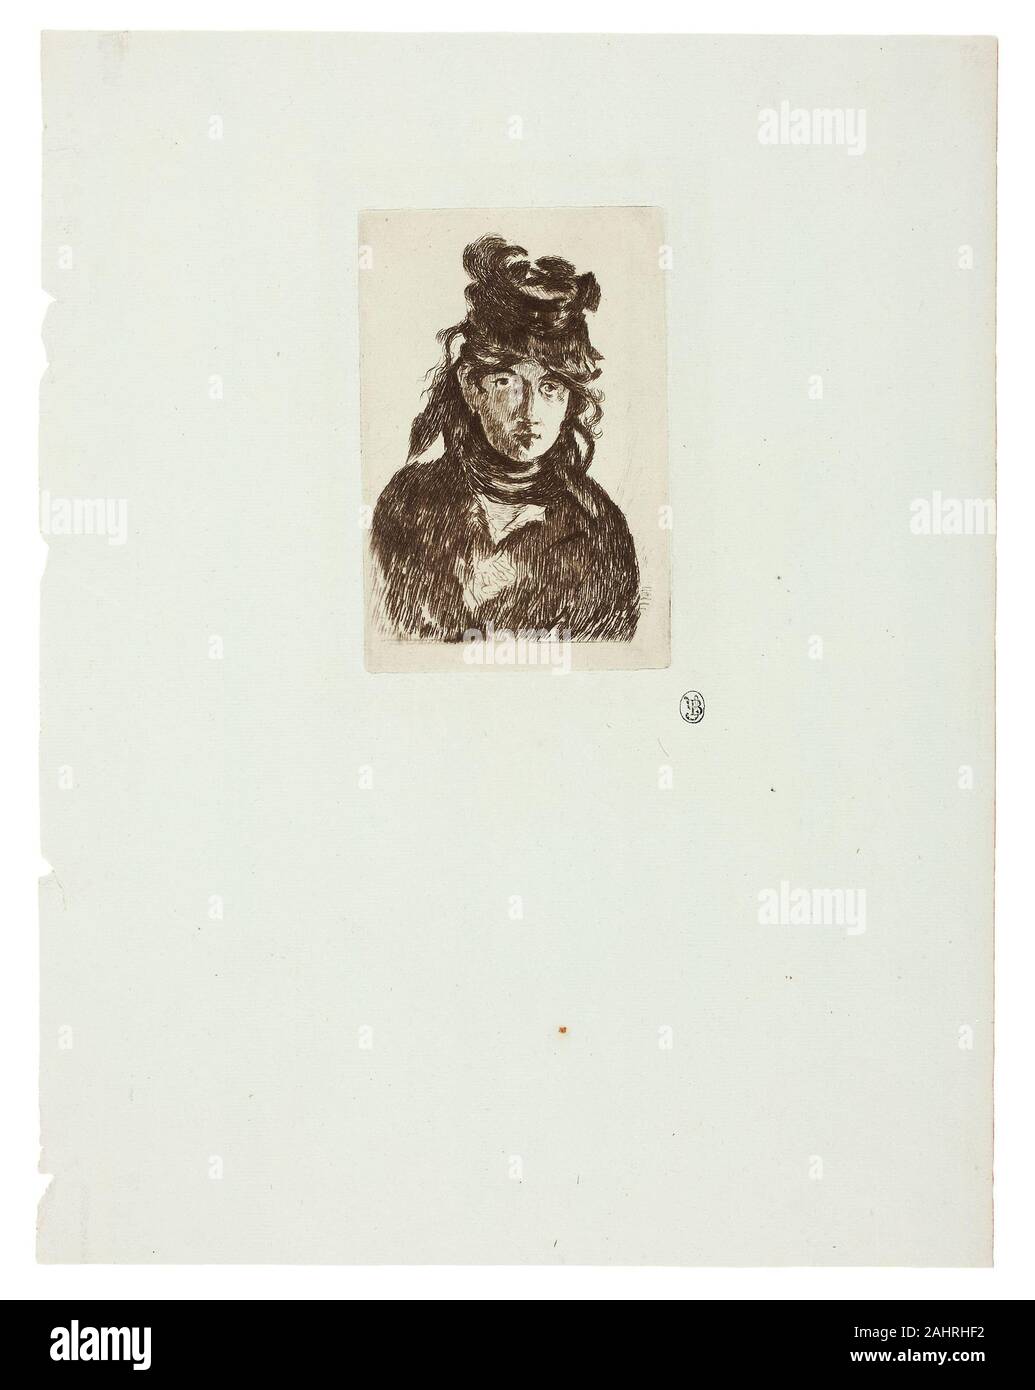 Édouard Manet. Berthe Morisot. 1872. France. Etching in brown on blue laid paper Stock Photo